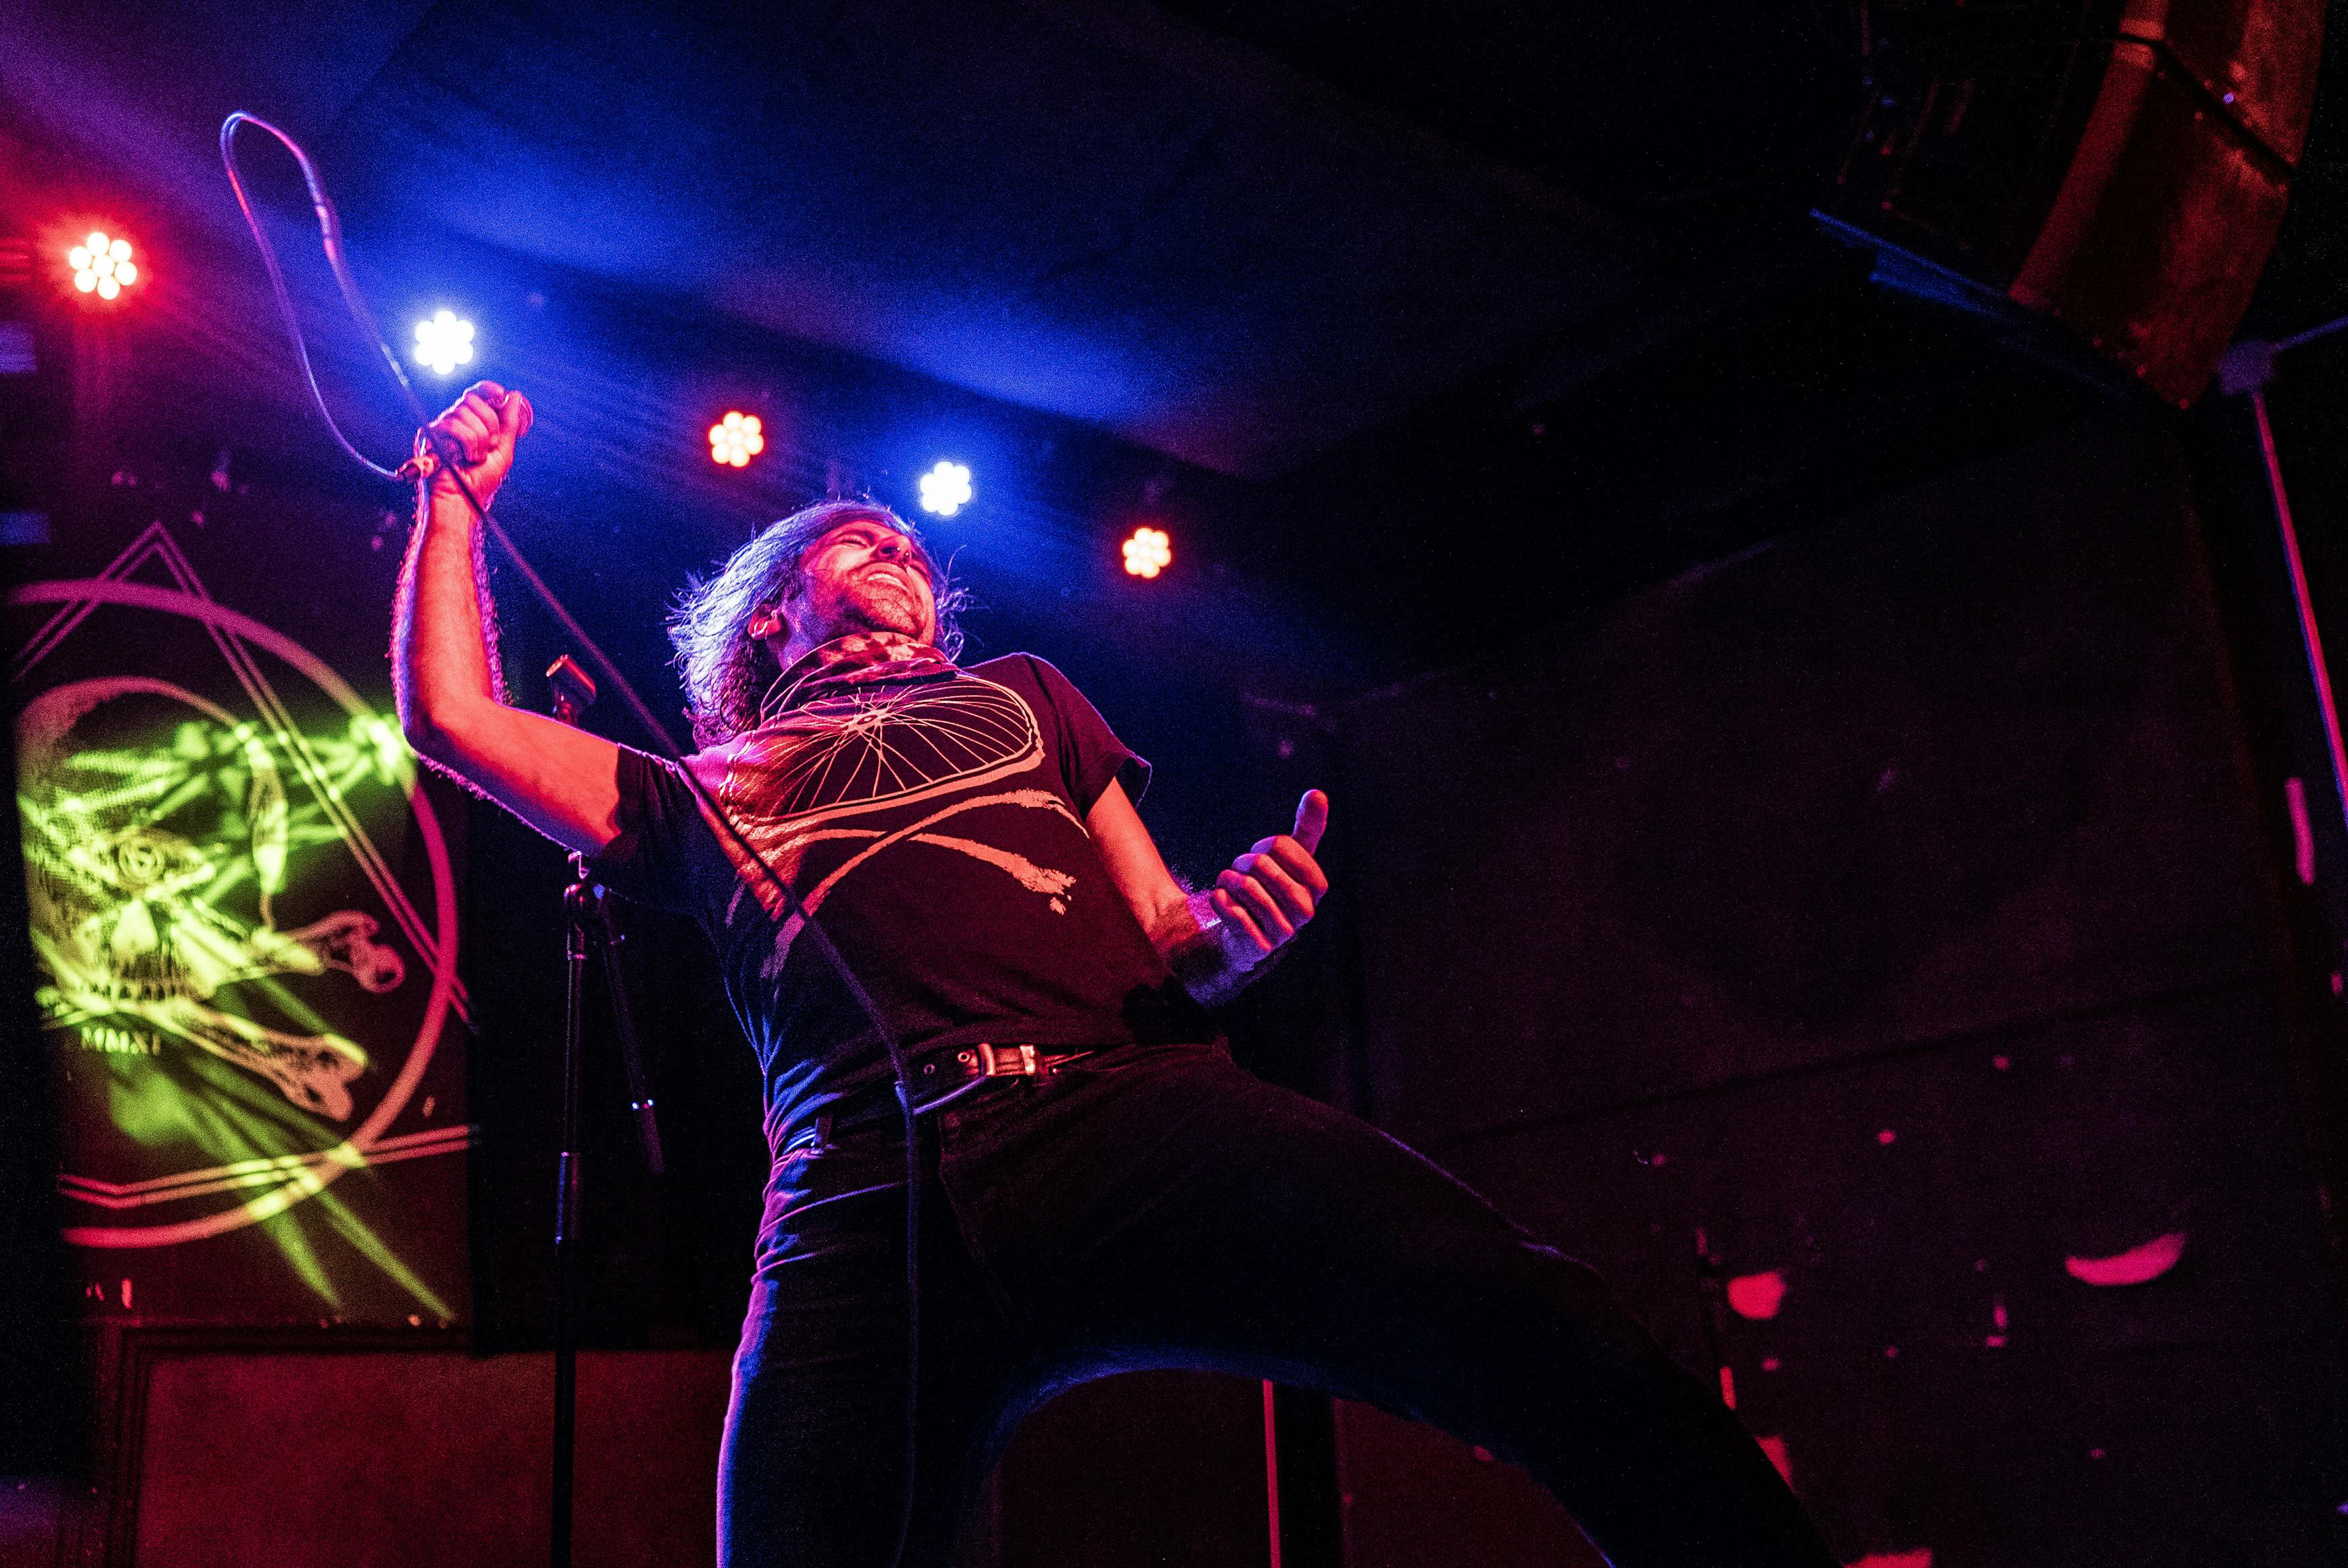 Gallery: Heavy Metal Karaoke at Revocation's Listening Party for The Outer Ones